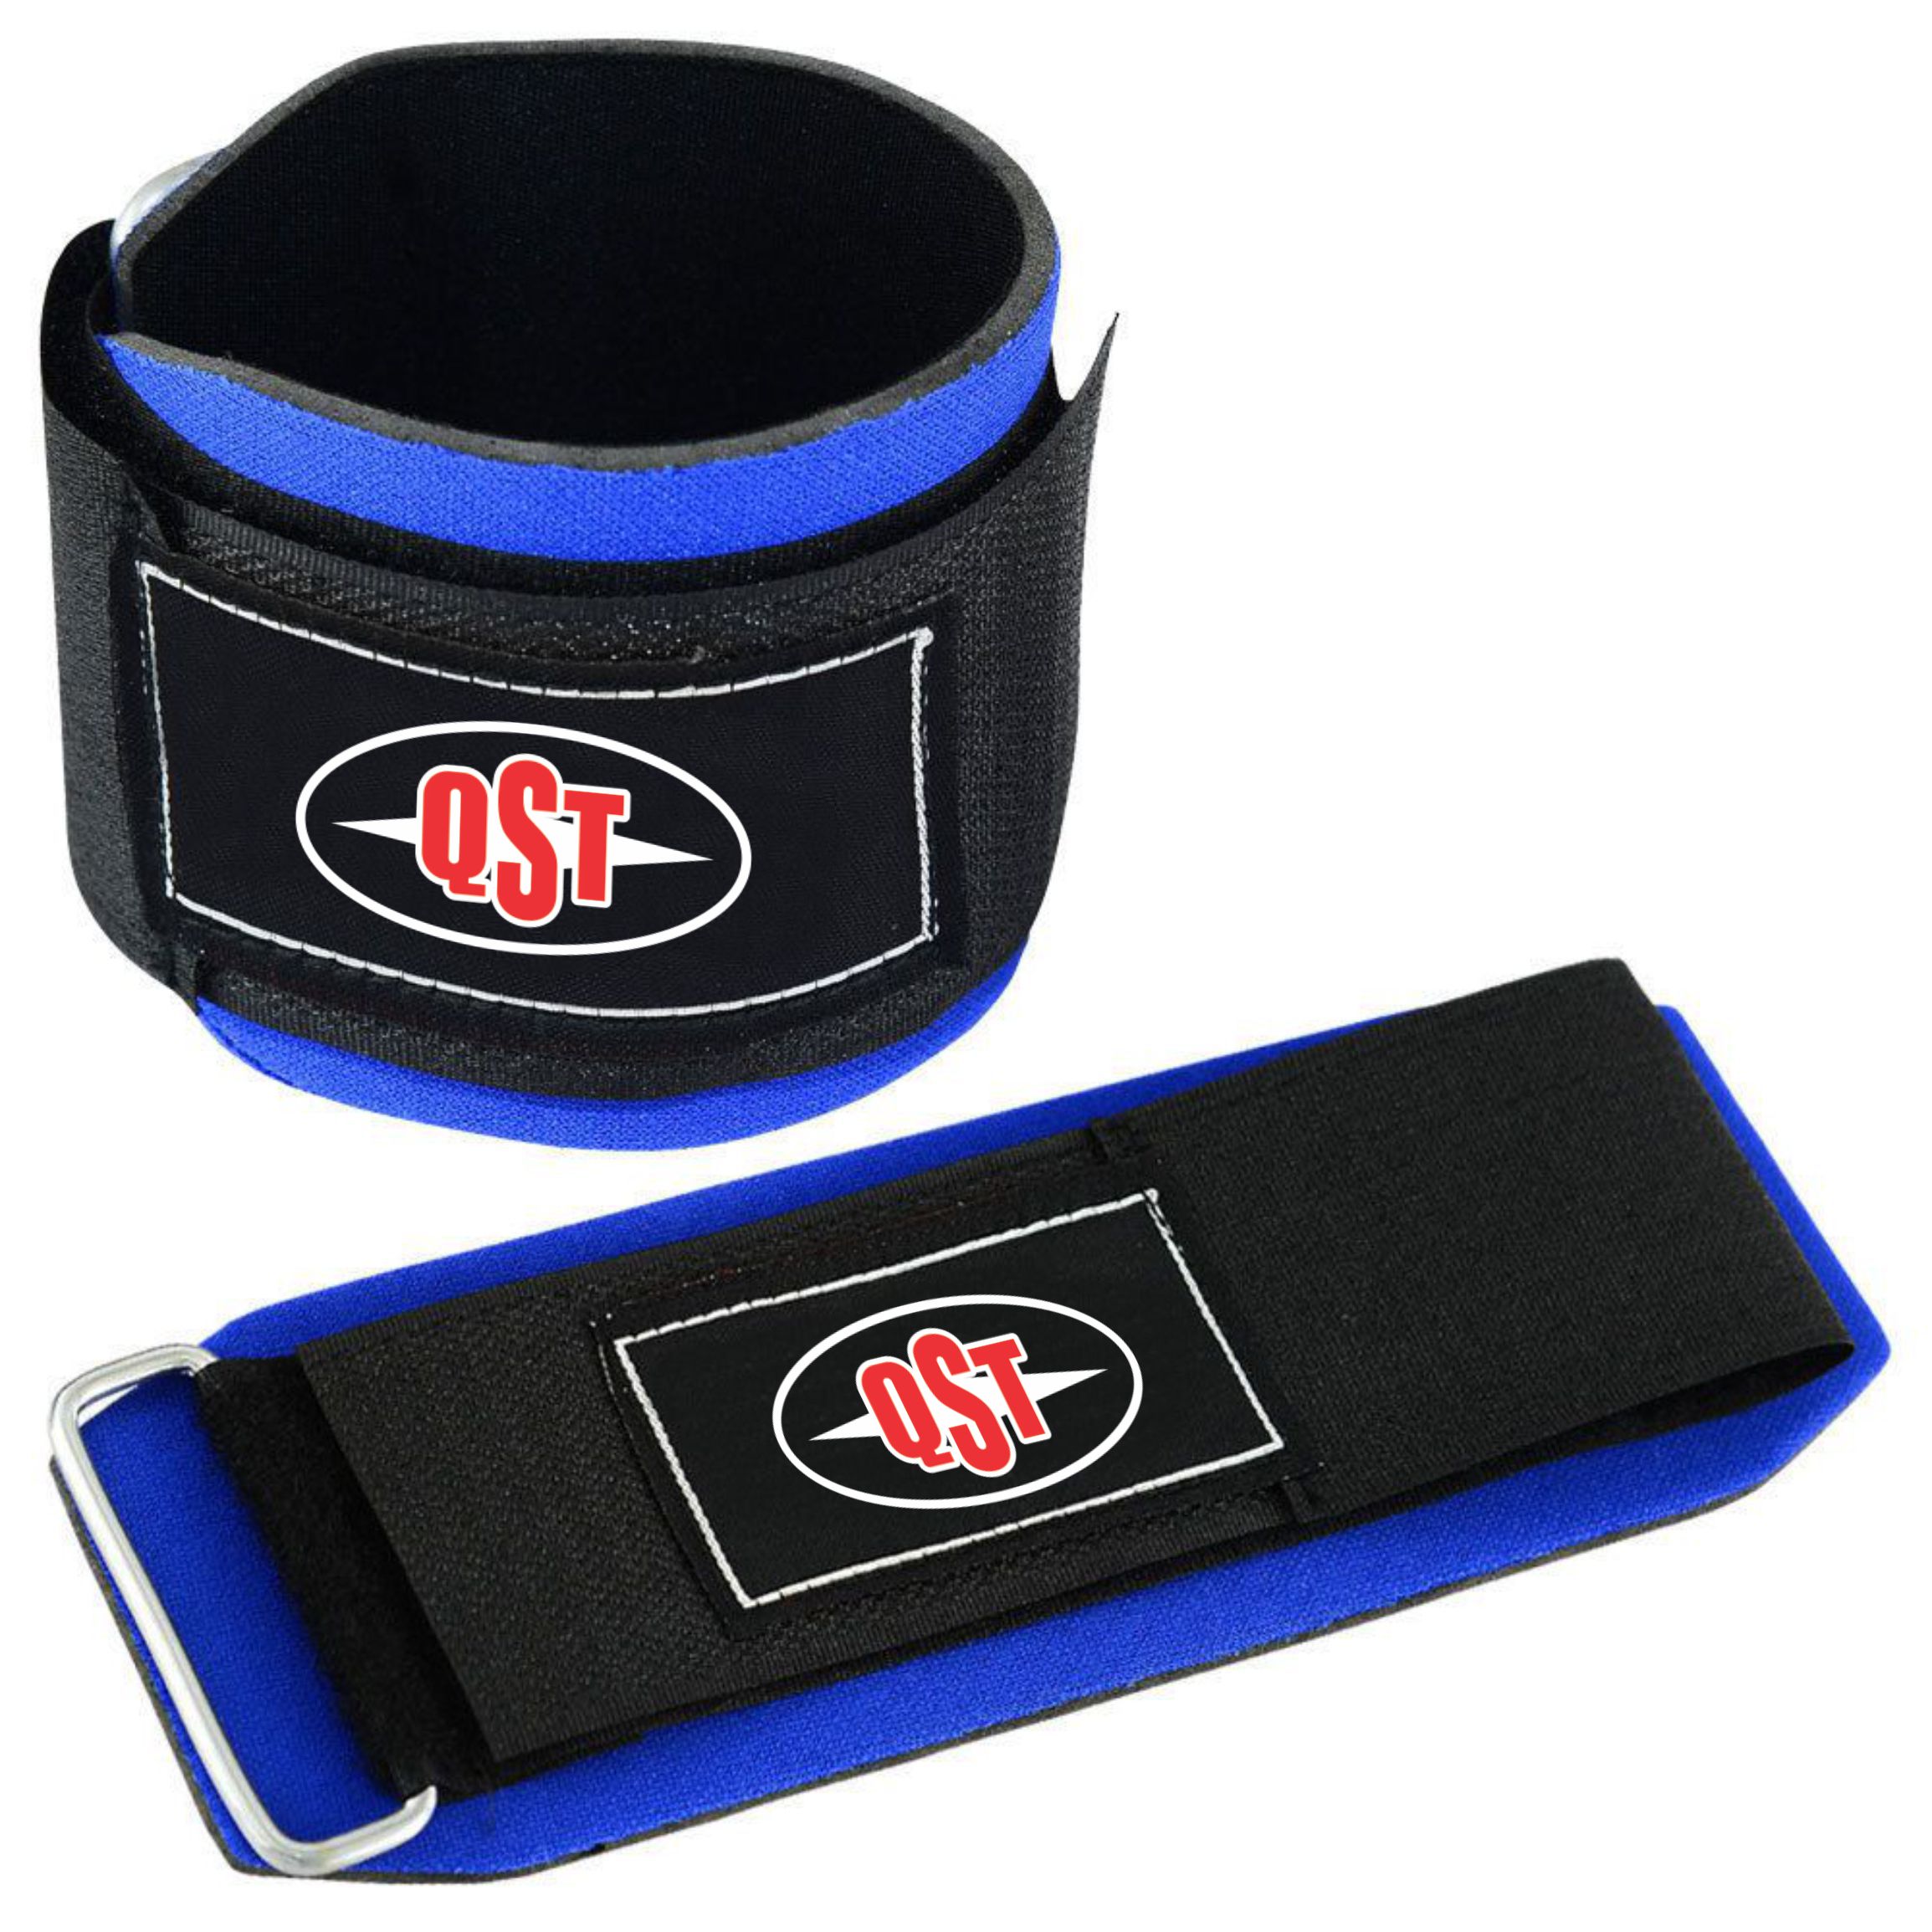 Weightlifting Accessories